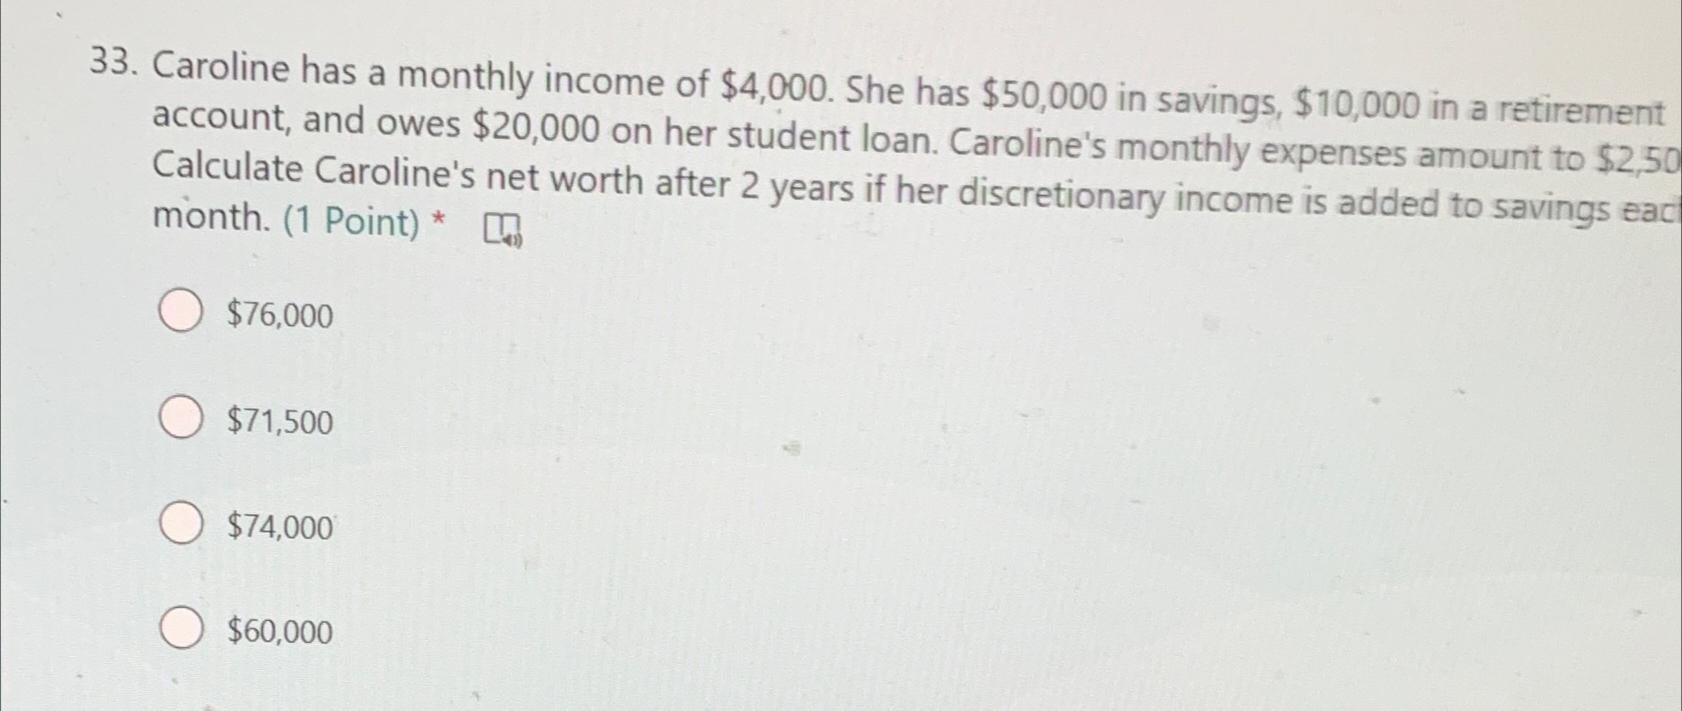 33. Caroline has a monthly income of $4,000. She has $50,000 in savings, $10,000 in a retirement account, and